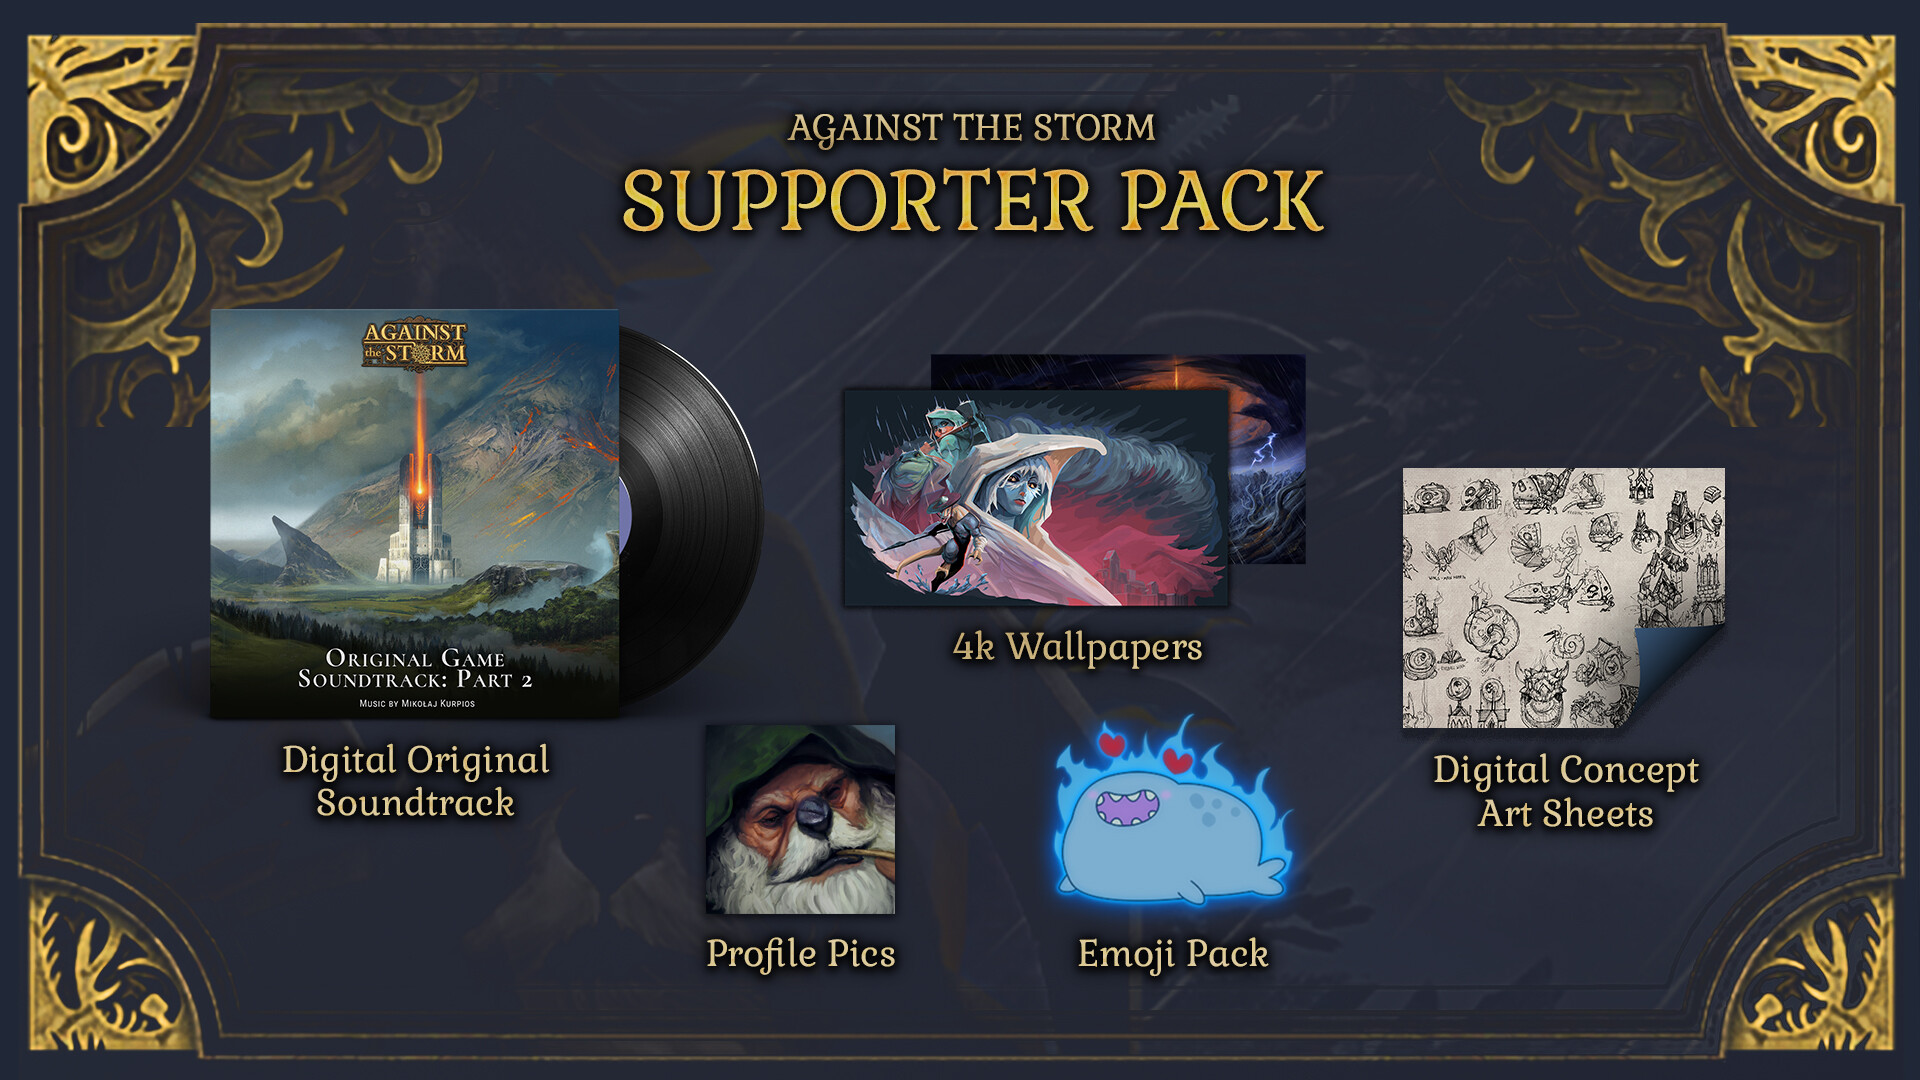 Against the Storm - Supporter Pack DLC Steam CD Key, $7.74